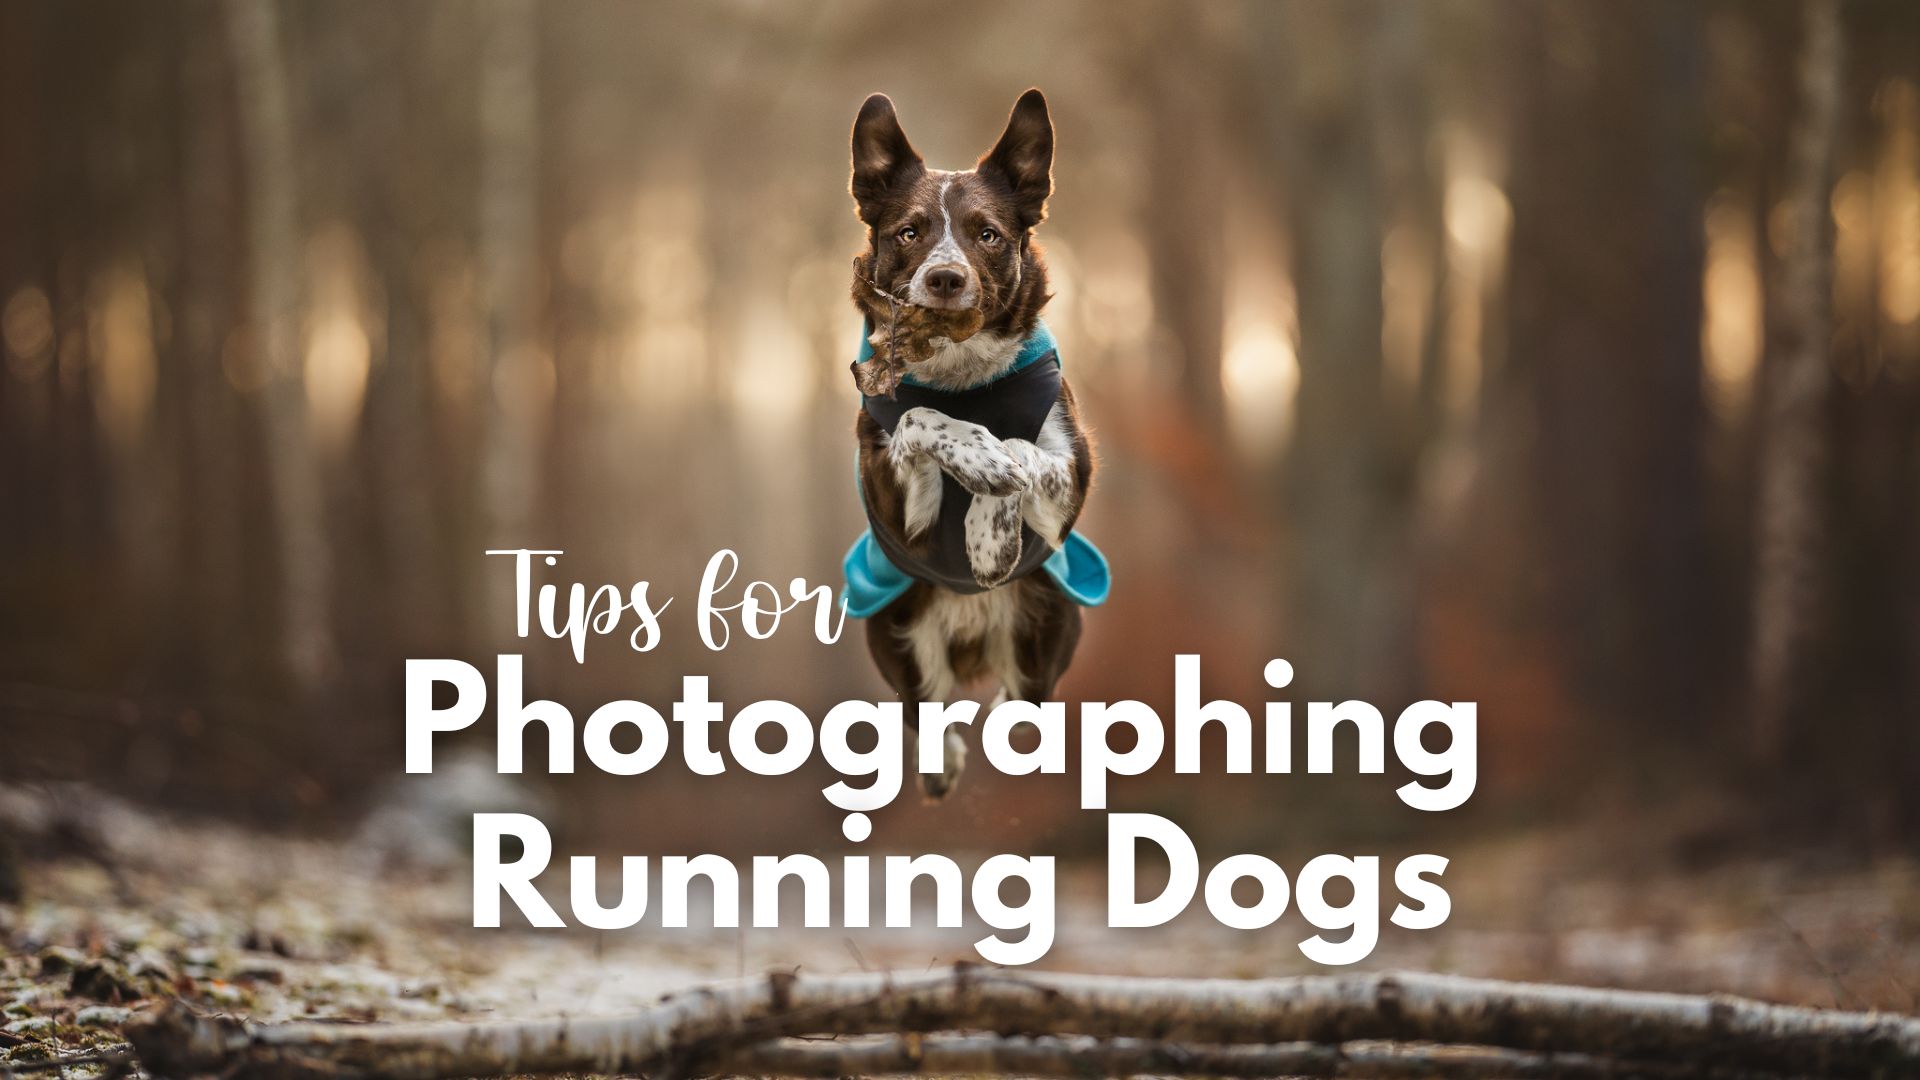 Tips for Photographing Running Dogs!